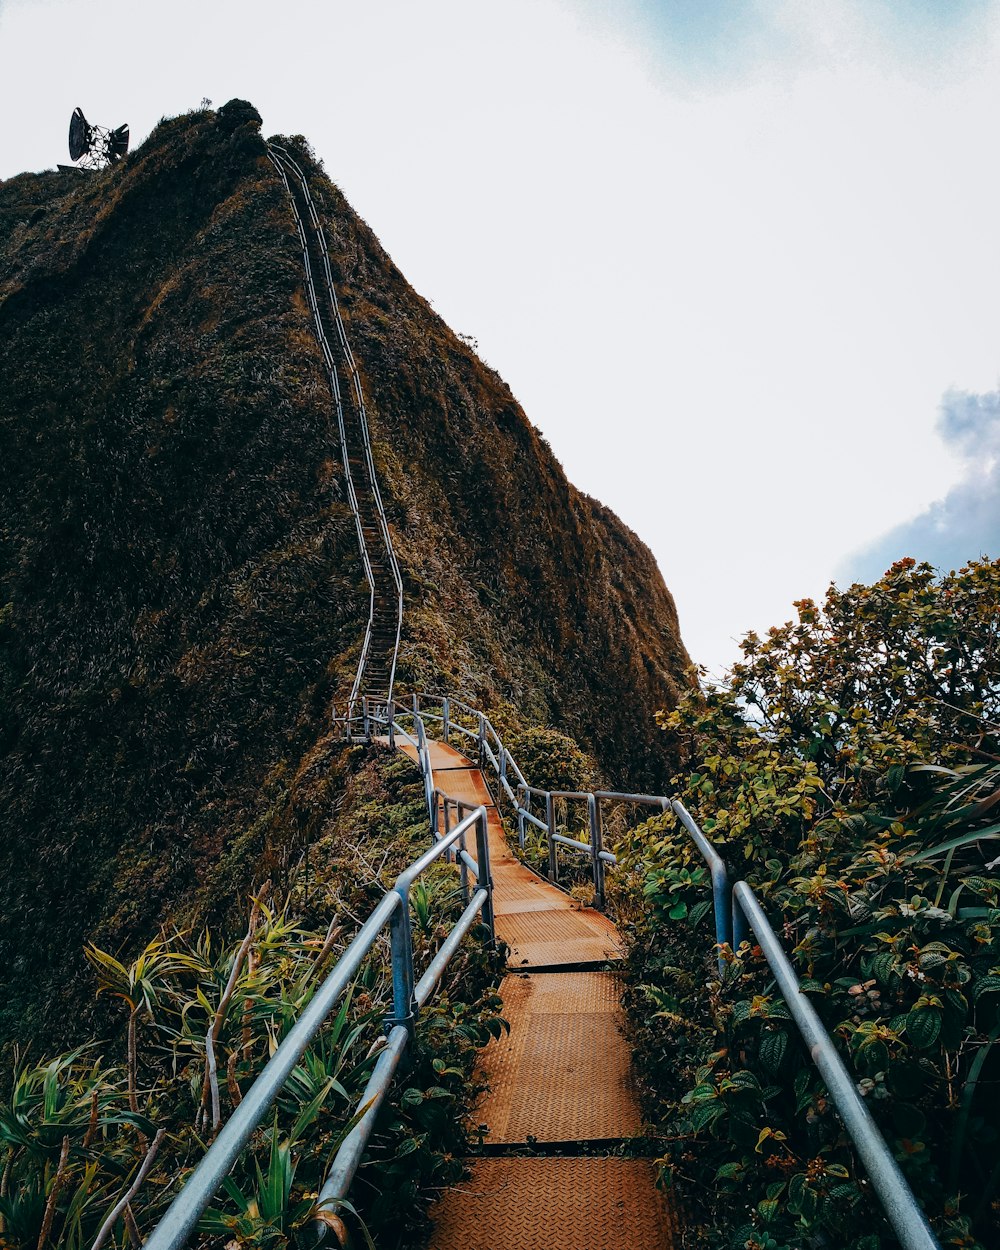 a long metal stair way going up a mountain